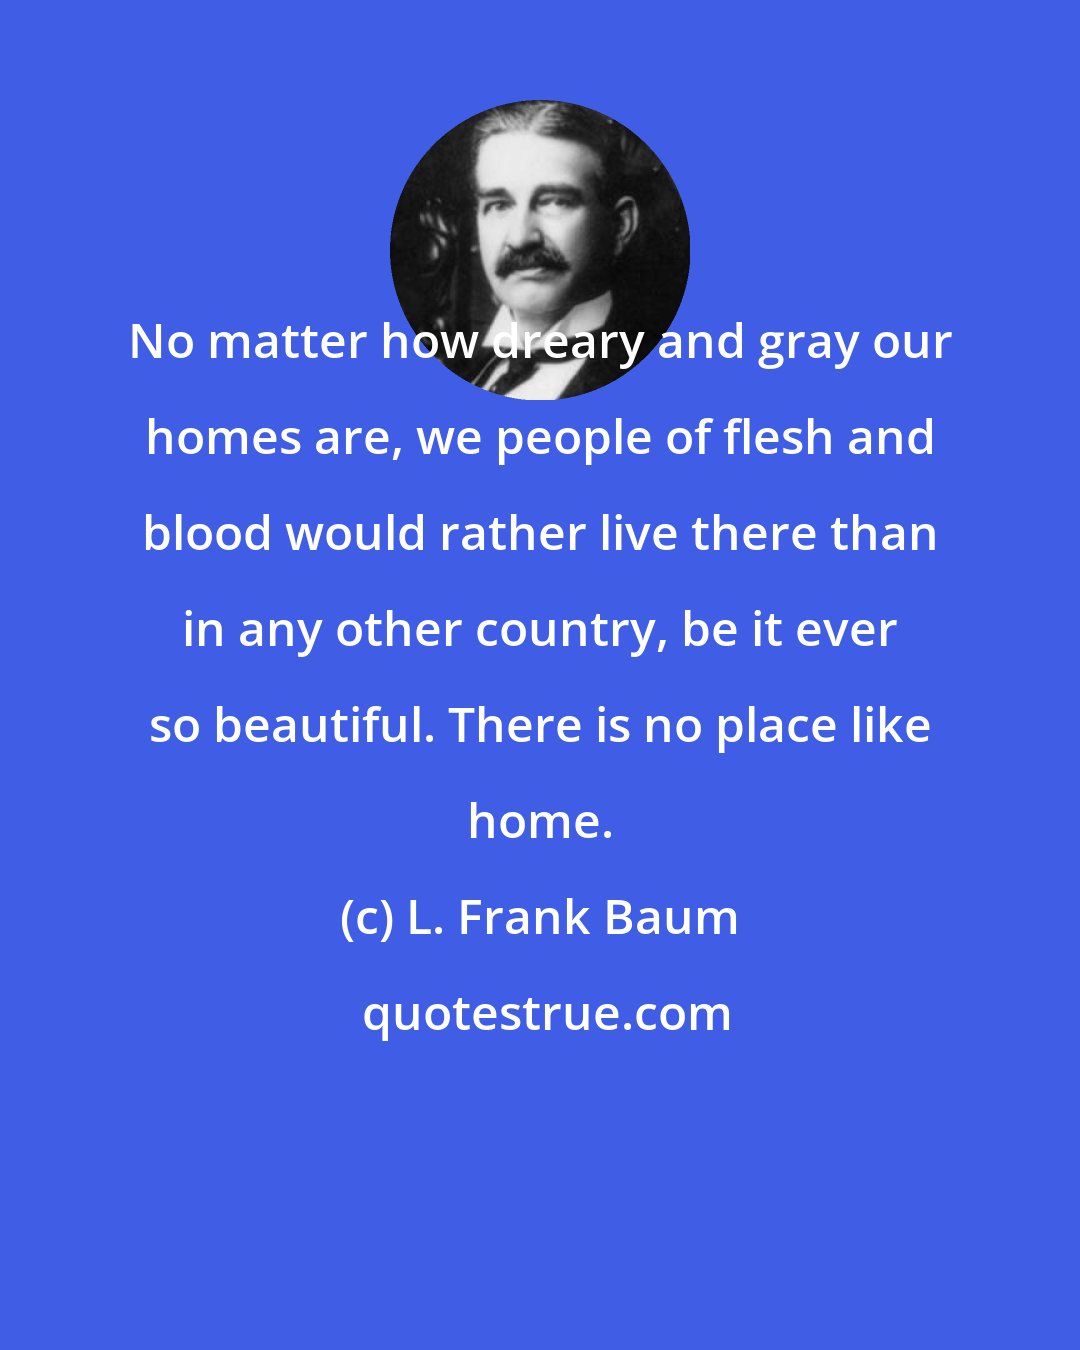 L. Frank Baum: No matter how dreary and gray our homes are, we people of flesh and blood would rather live there than in any other country, be it ever so beautiful. There is no place like home.